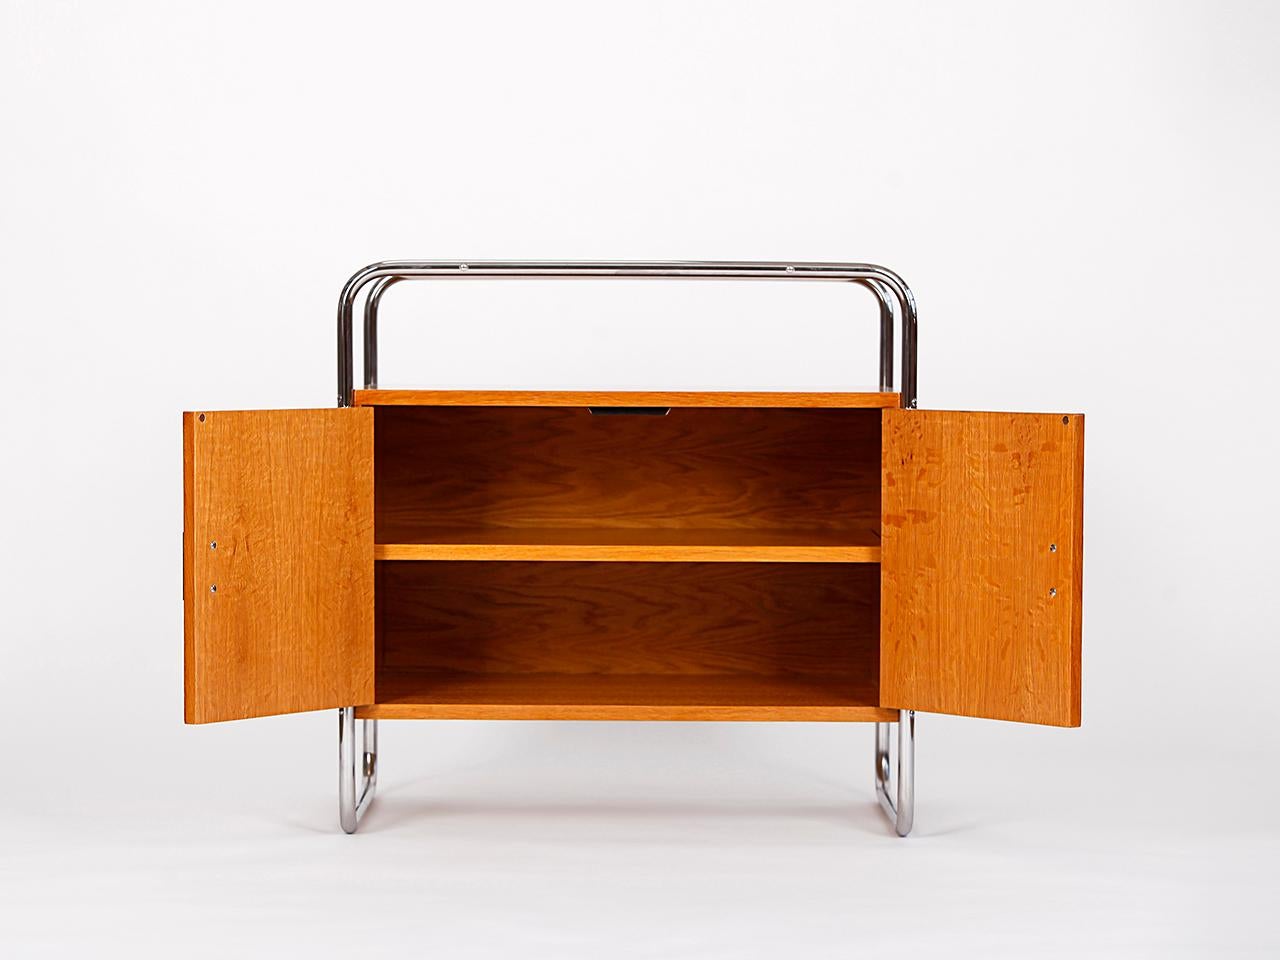 This sideboard with a construction of polished stainless steel and oak veneered plywood is made to order by Tschechisches Wohndesign.
Delivery time if not in stock 4-6 weeks. 1 piece available at the moment. Our new productions are made by hand